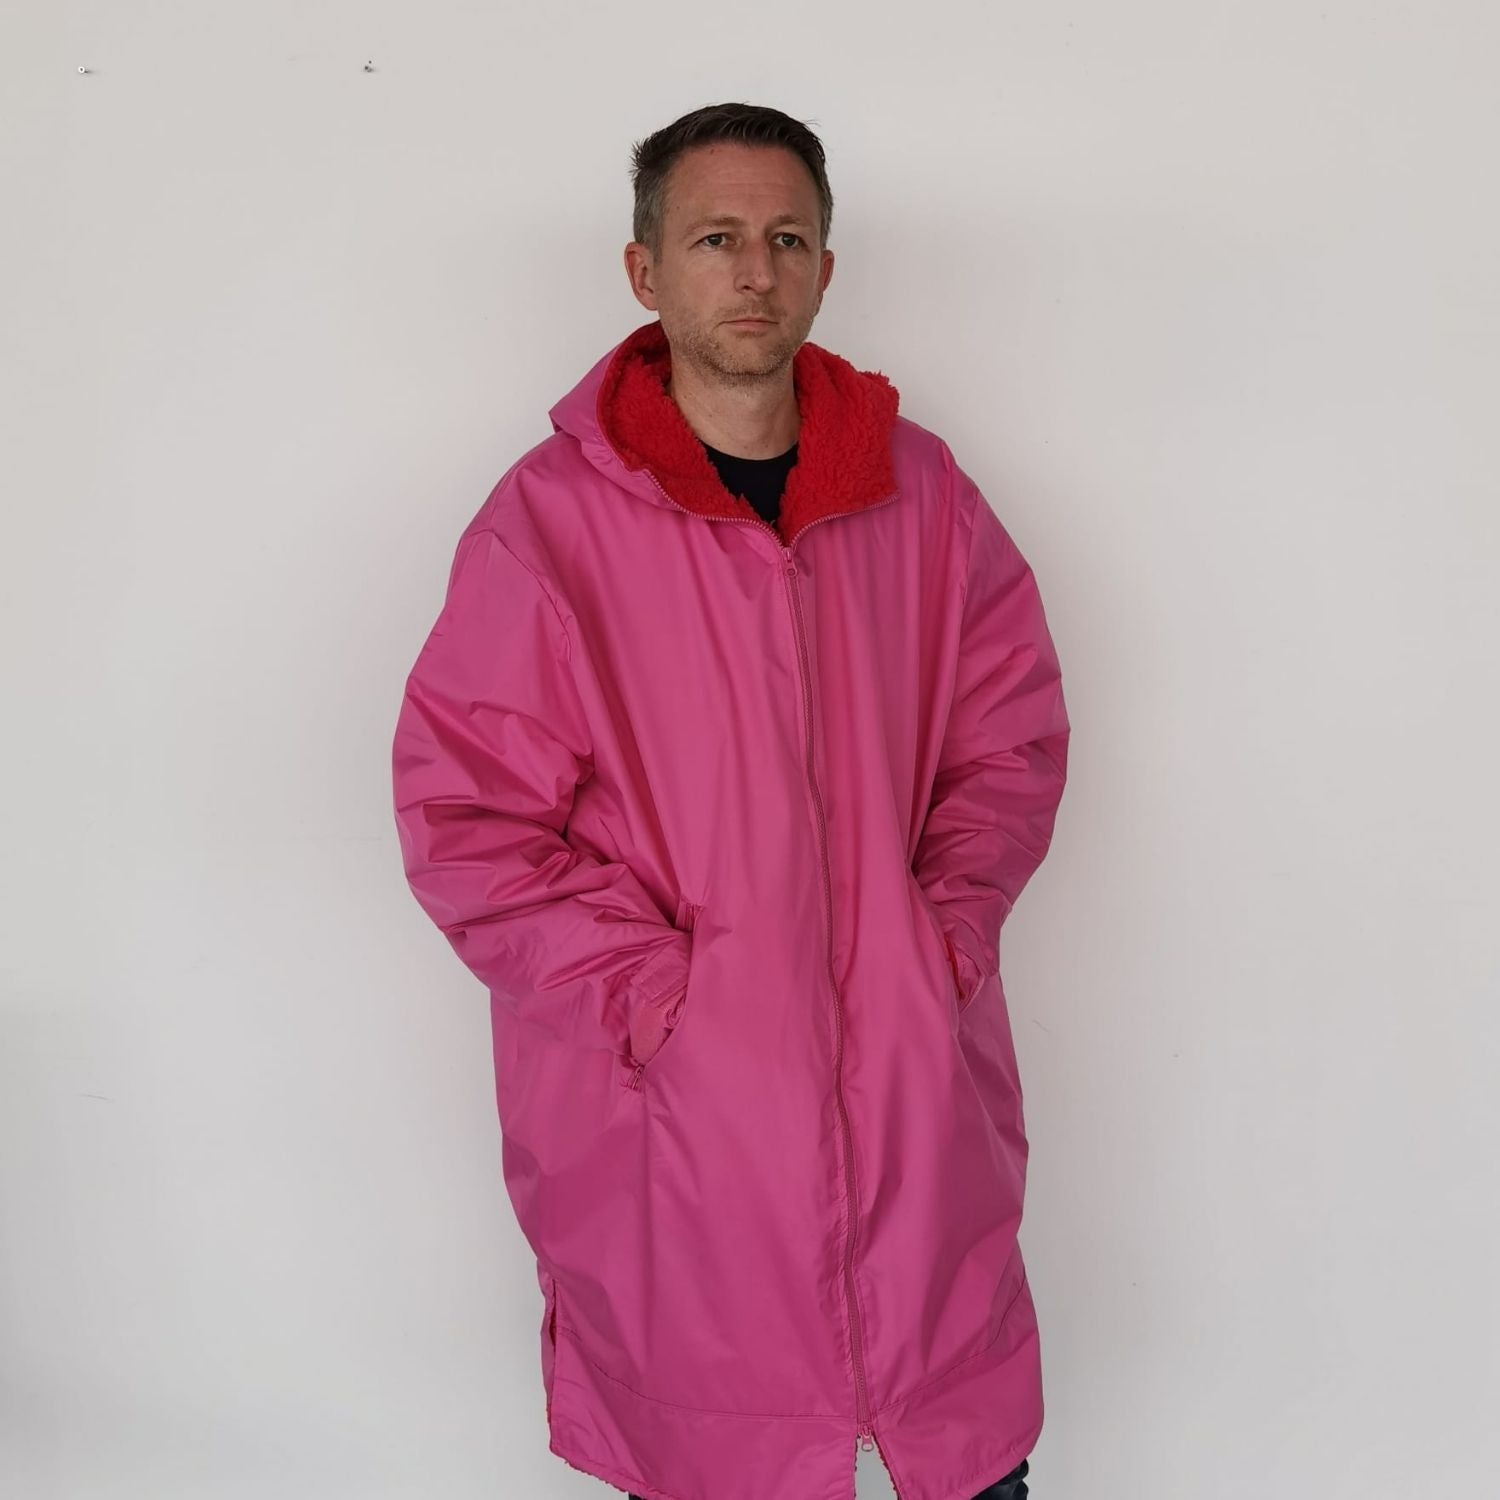 The Home Dry Changing Robe - Pink / Red 1 Shaws Department Stores